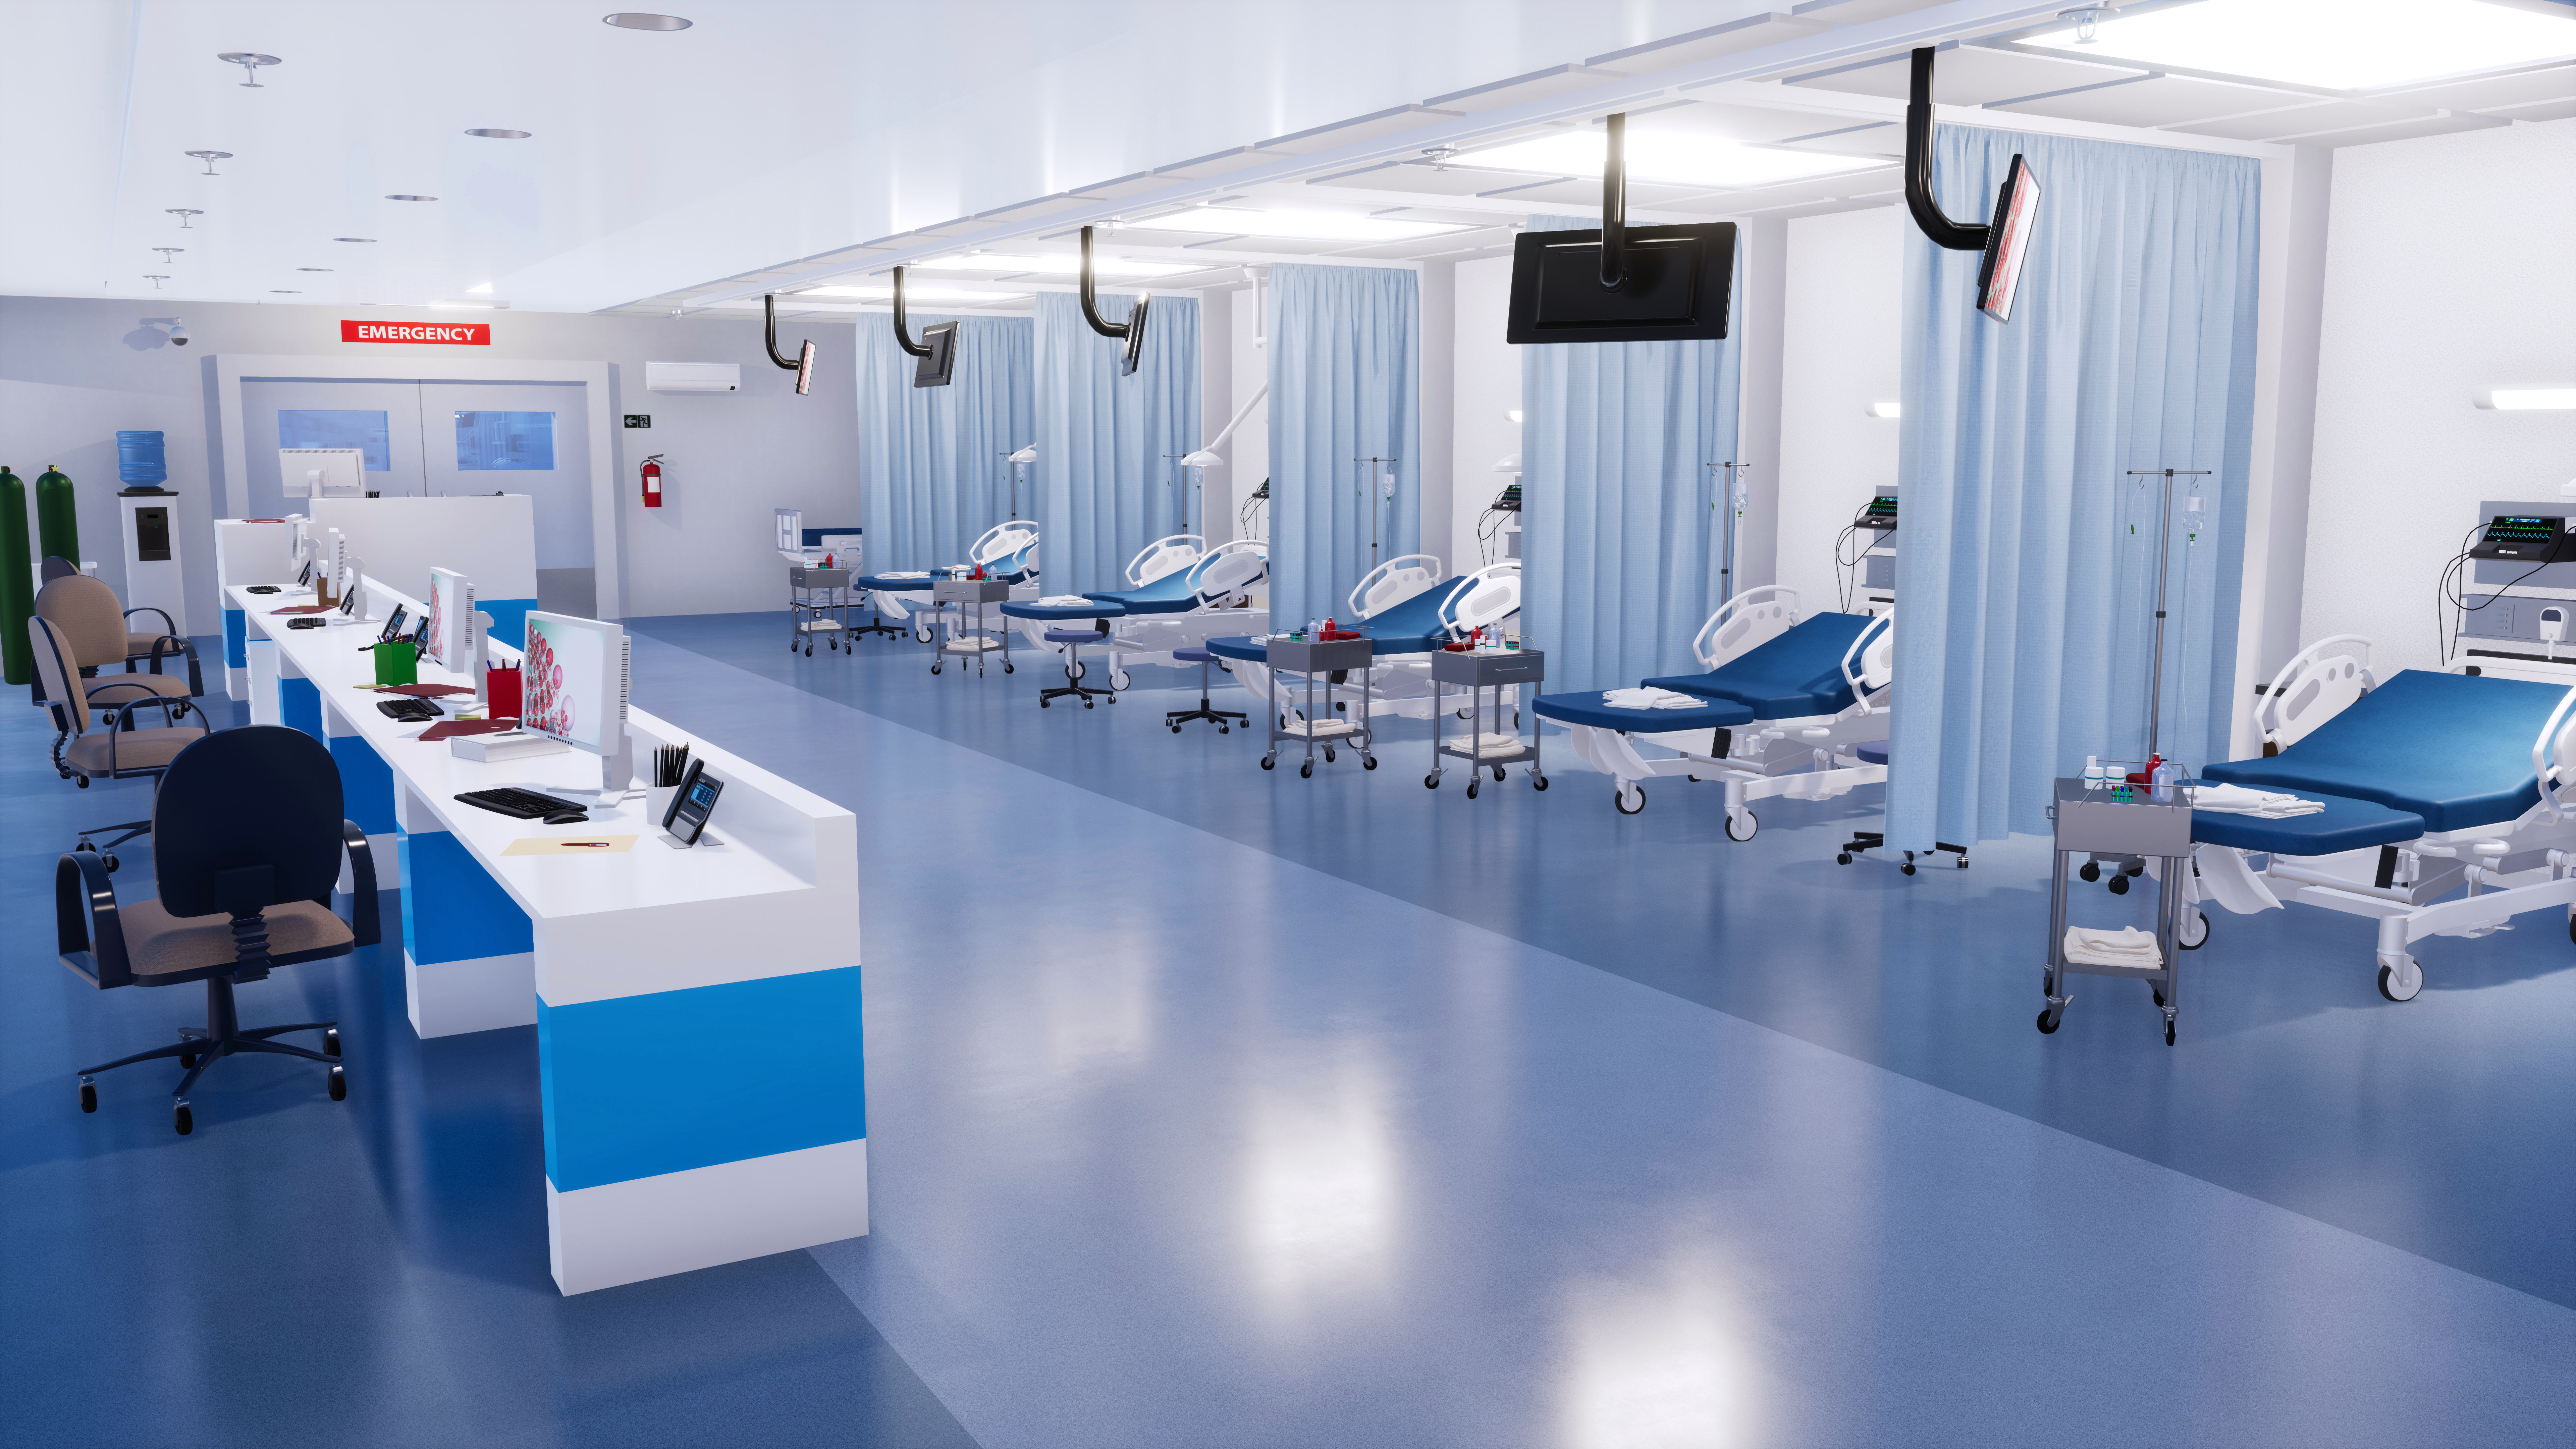 Picture of hospital beds with curtain dividers and nurses station.